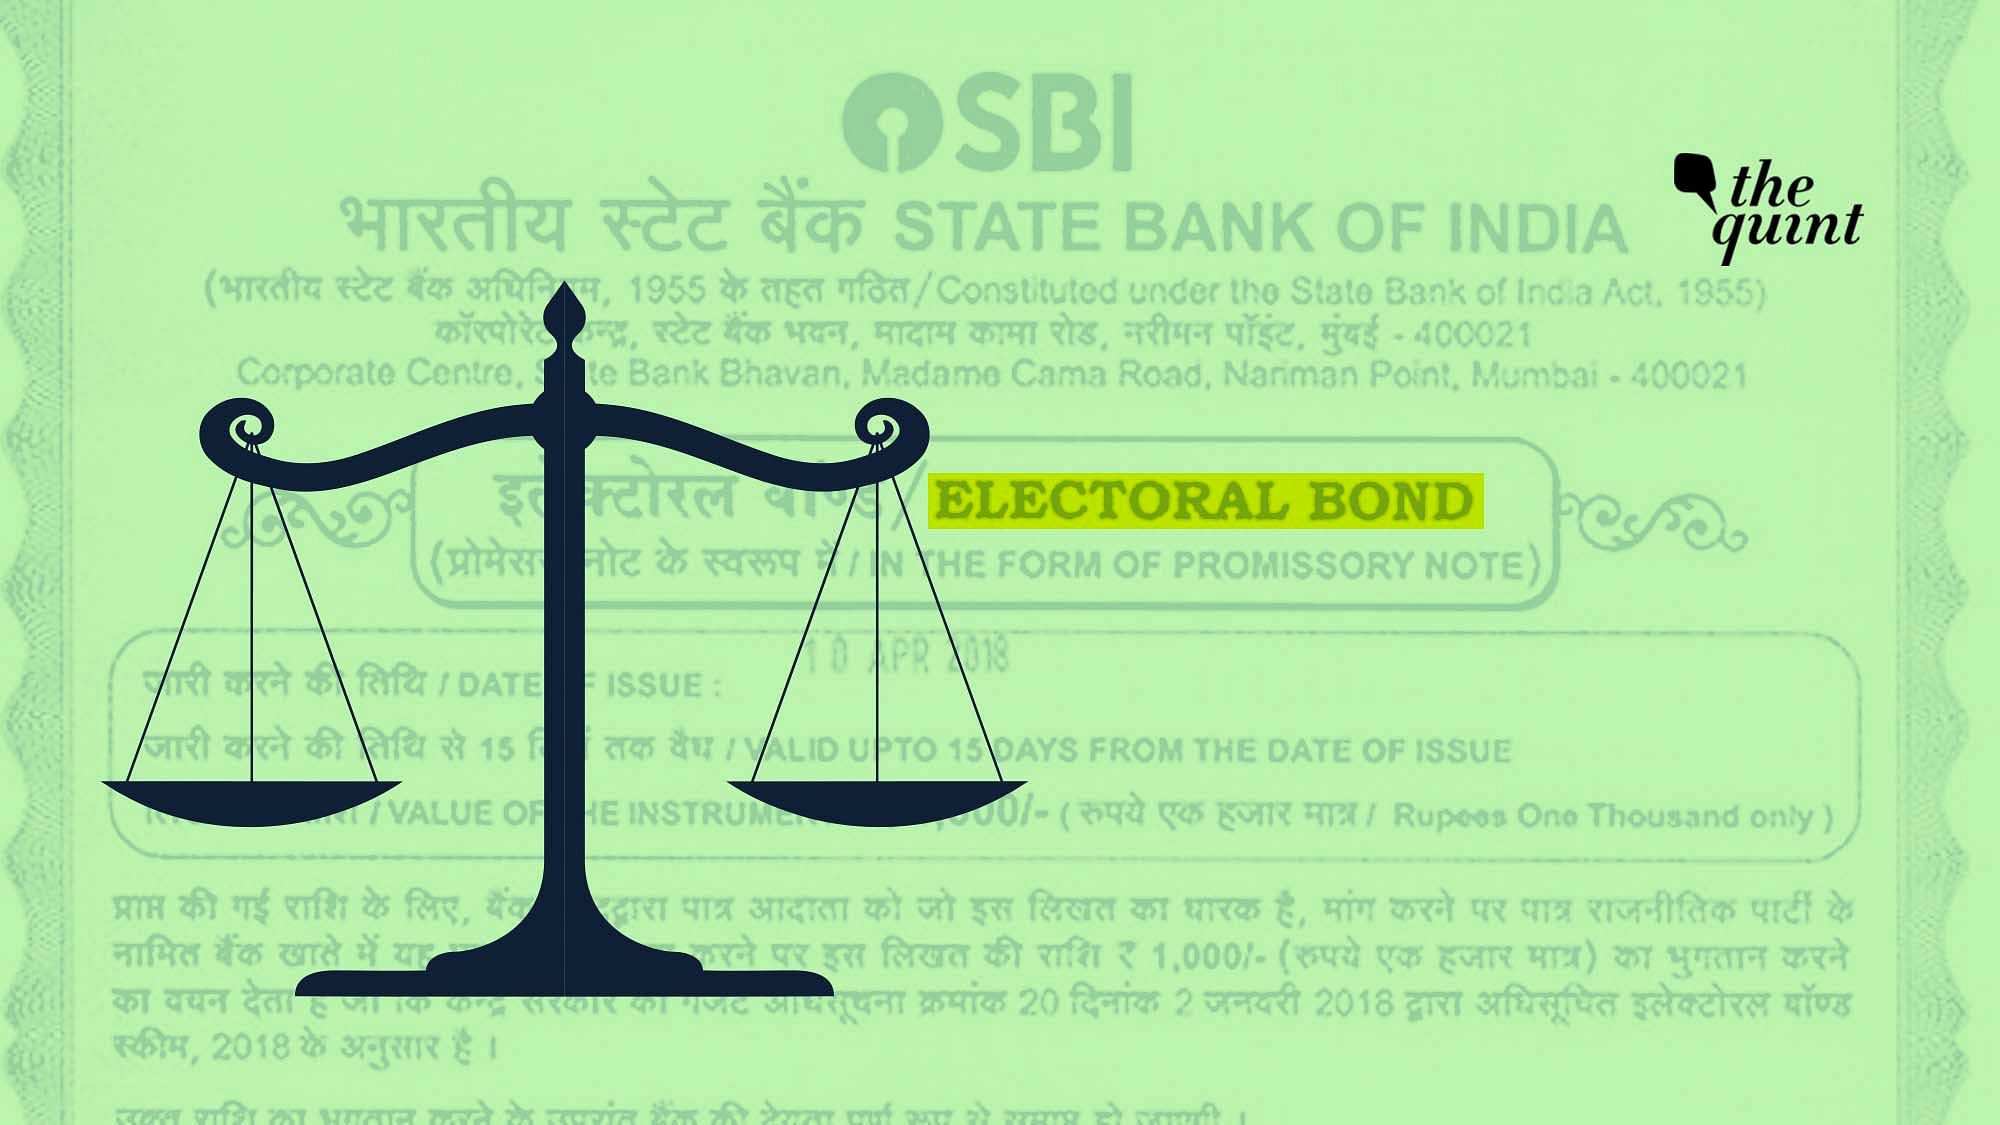 The Election Commission  has told the Supreme Court that it has received status of filing of electoral bonds from various political parties, including the BJP and the Congress, in a sealed cover.